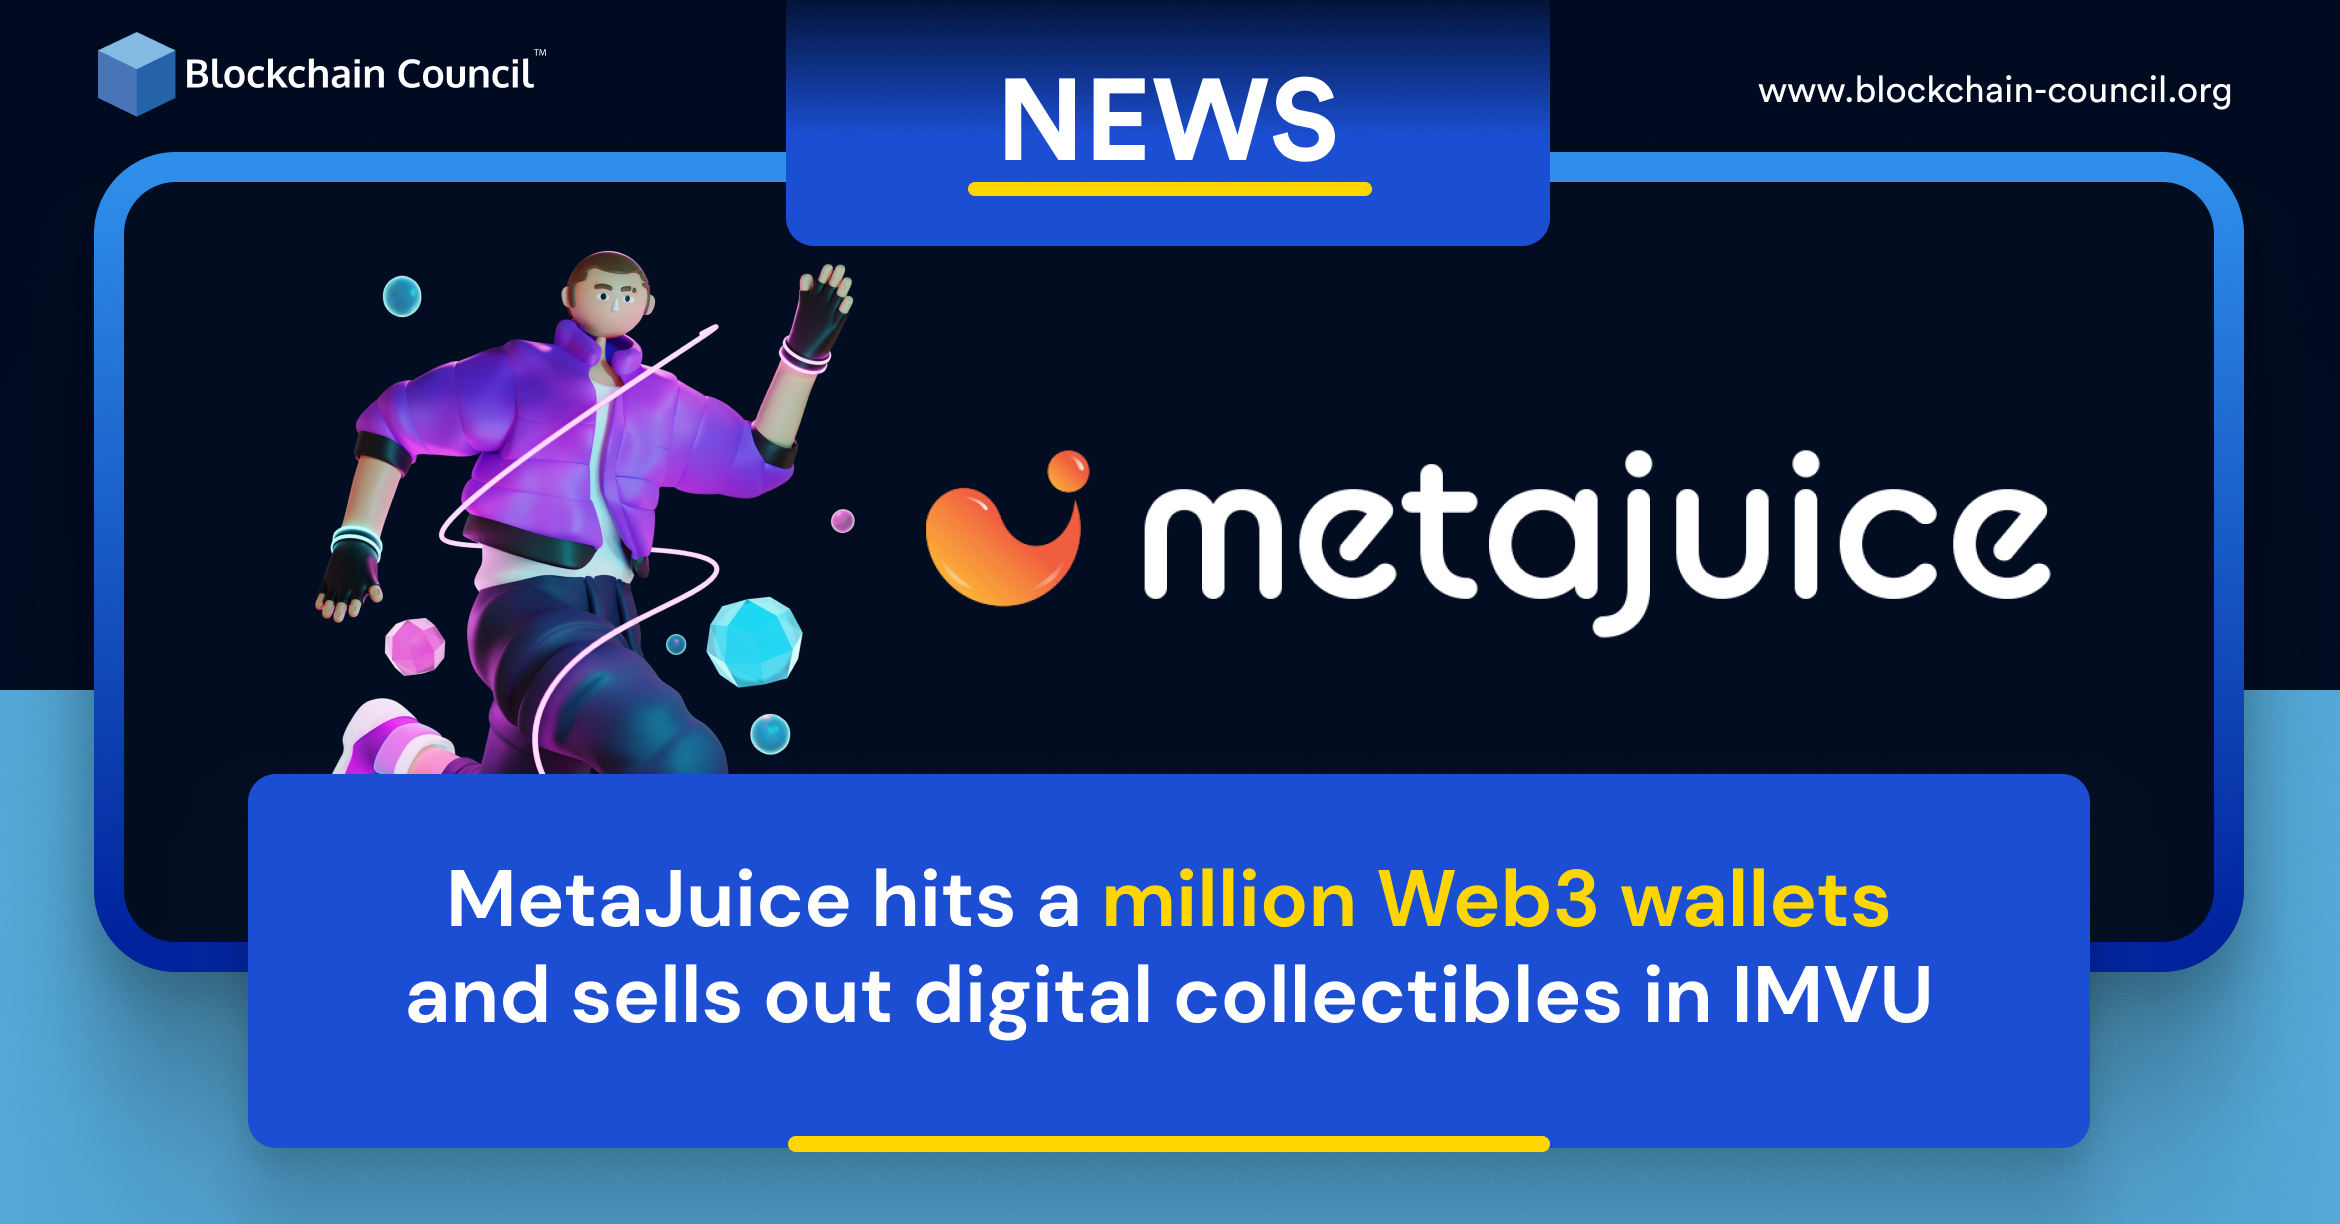 MetaJuice hits a million Web3 wallets and sells out digital collectibles in IMVU